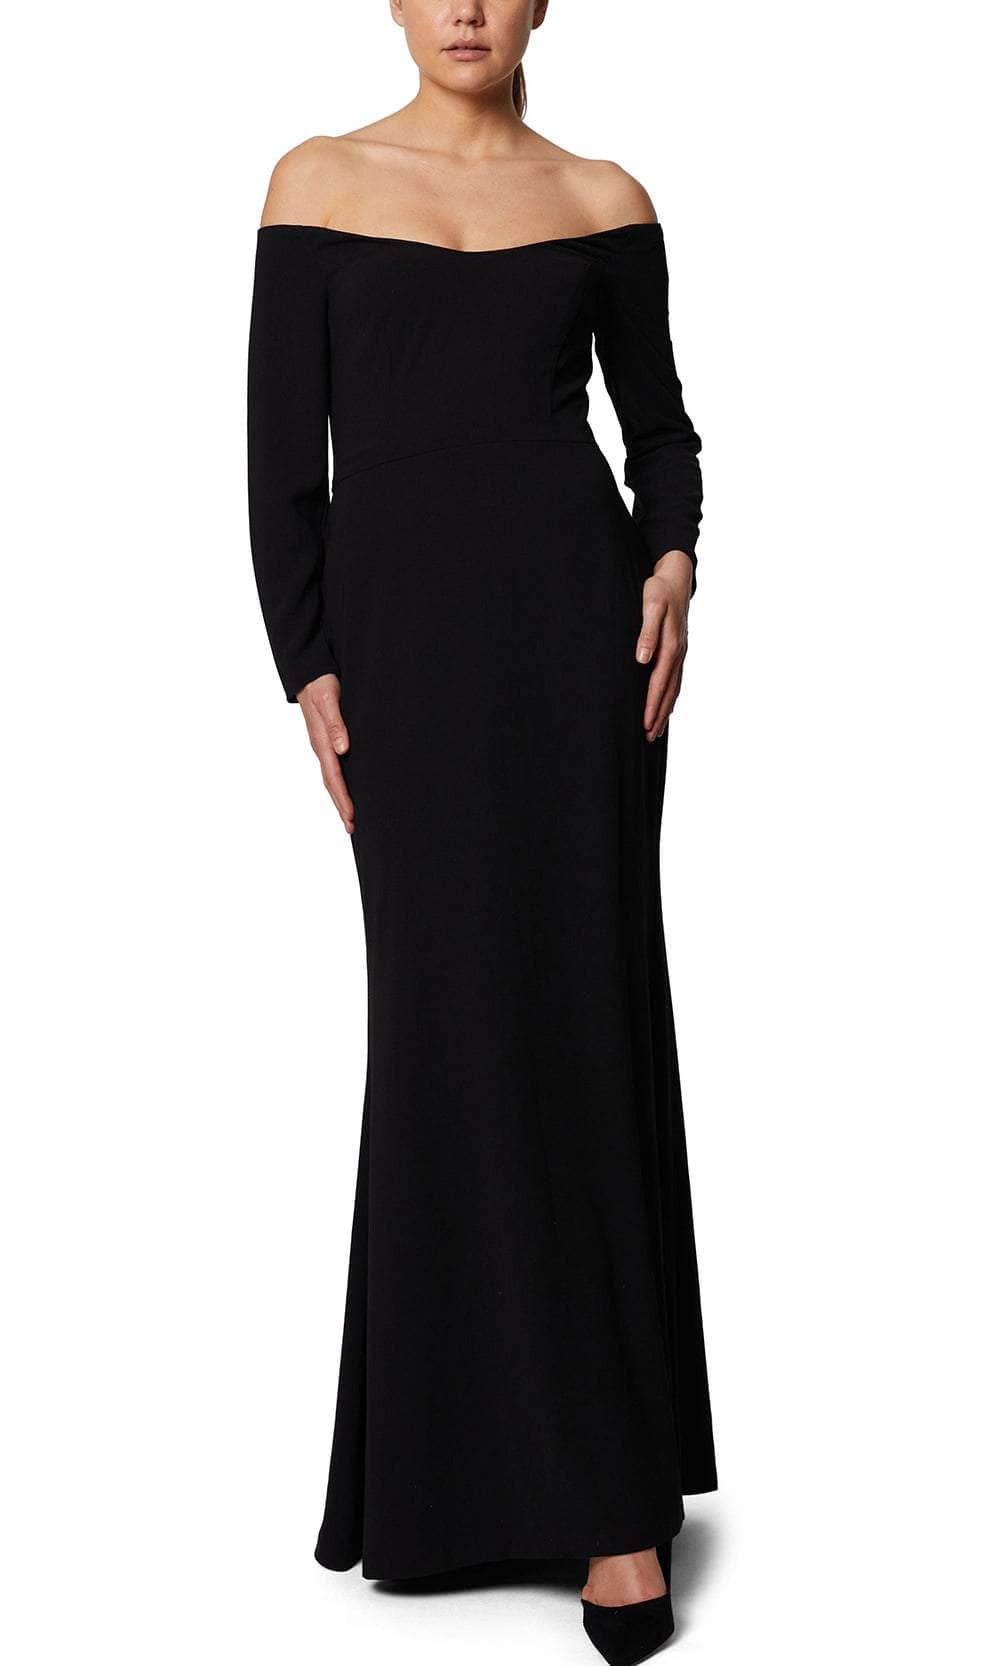 Image of Laundry HU07D51 - Long Sleeve Formal Gown